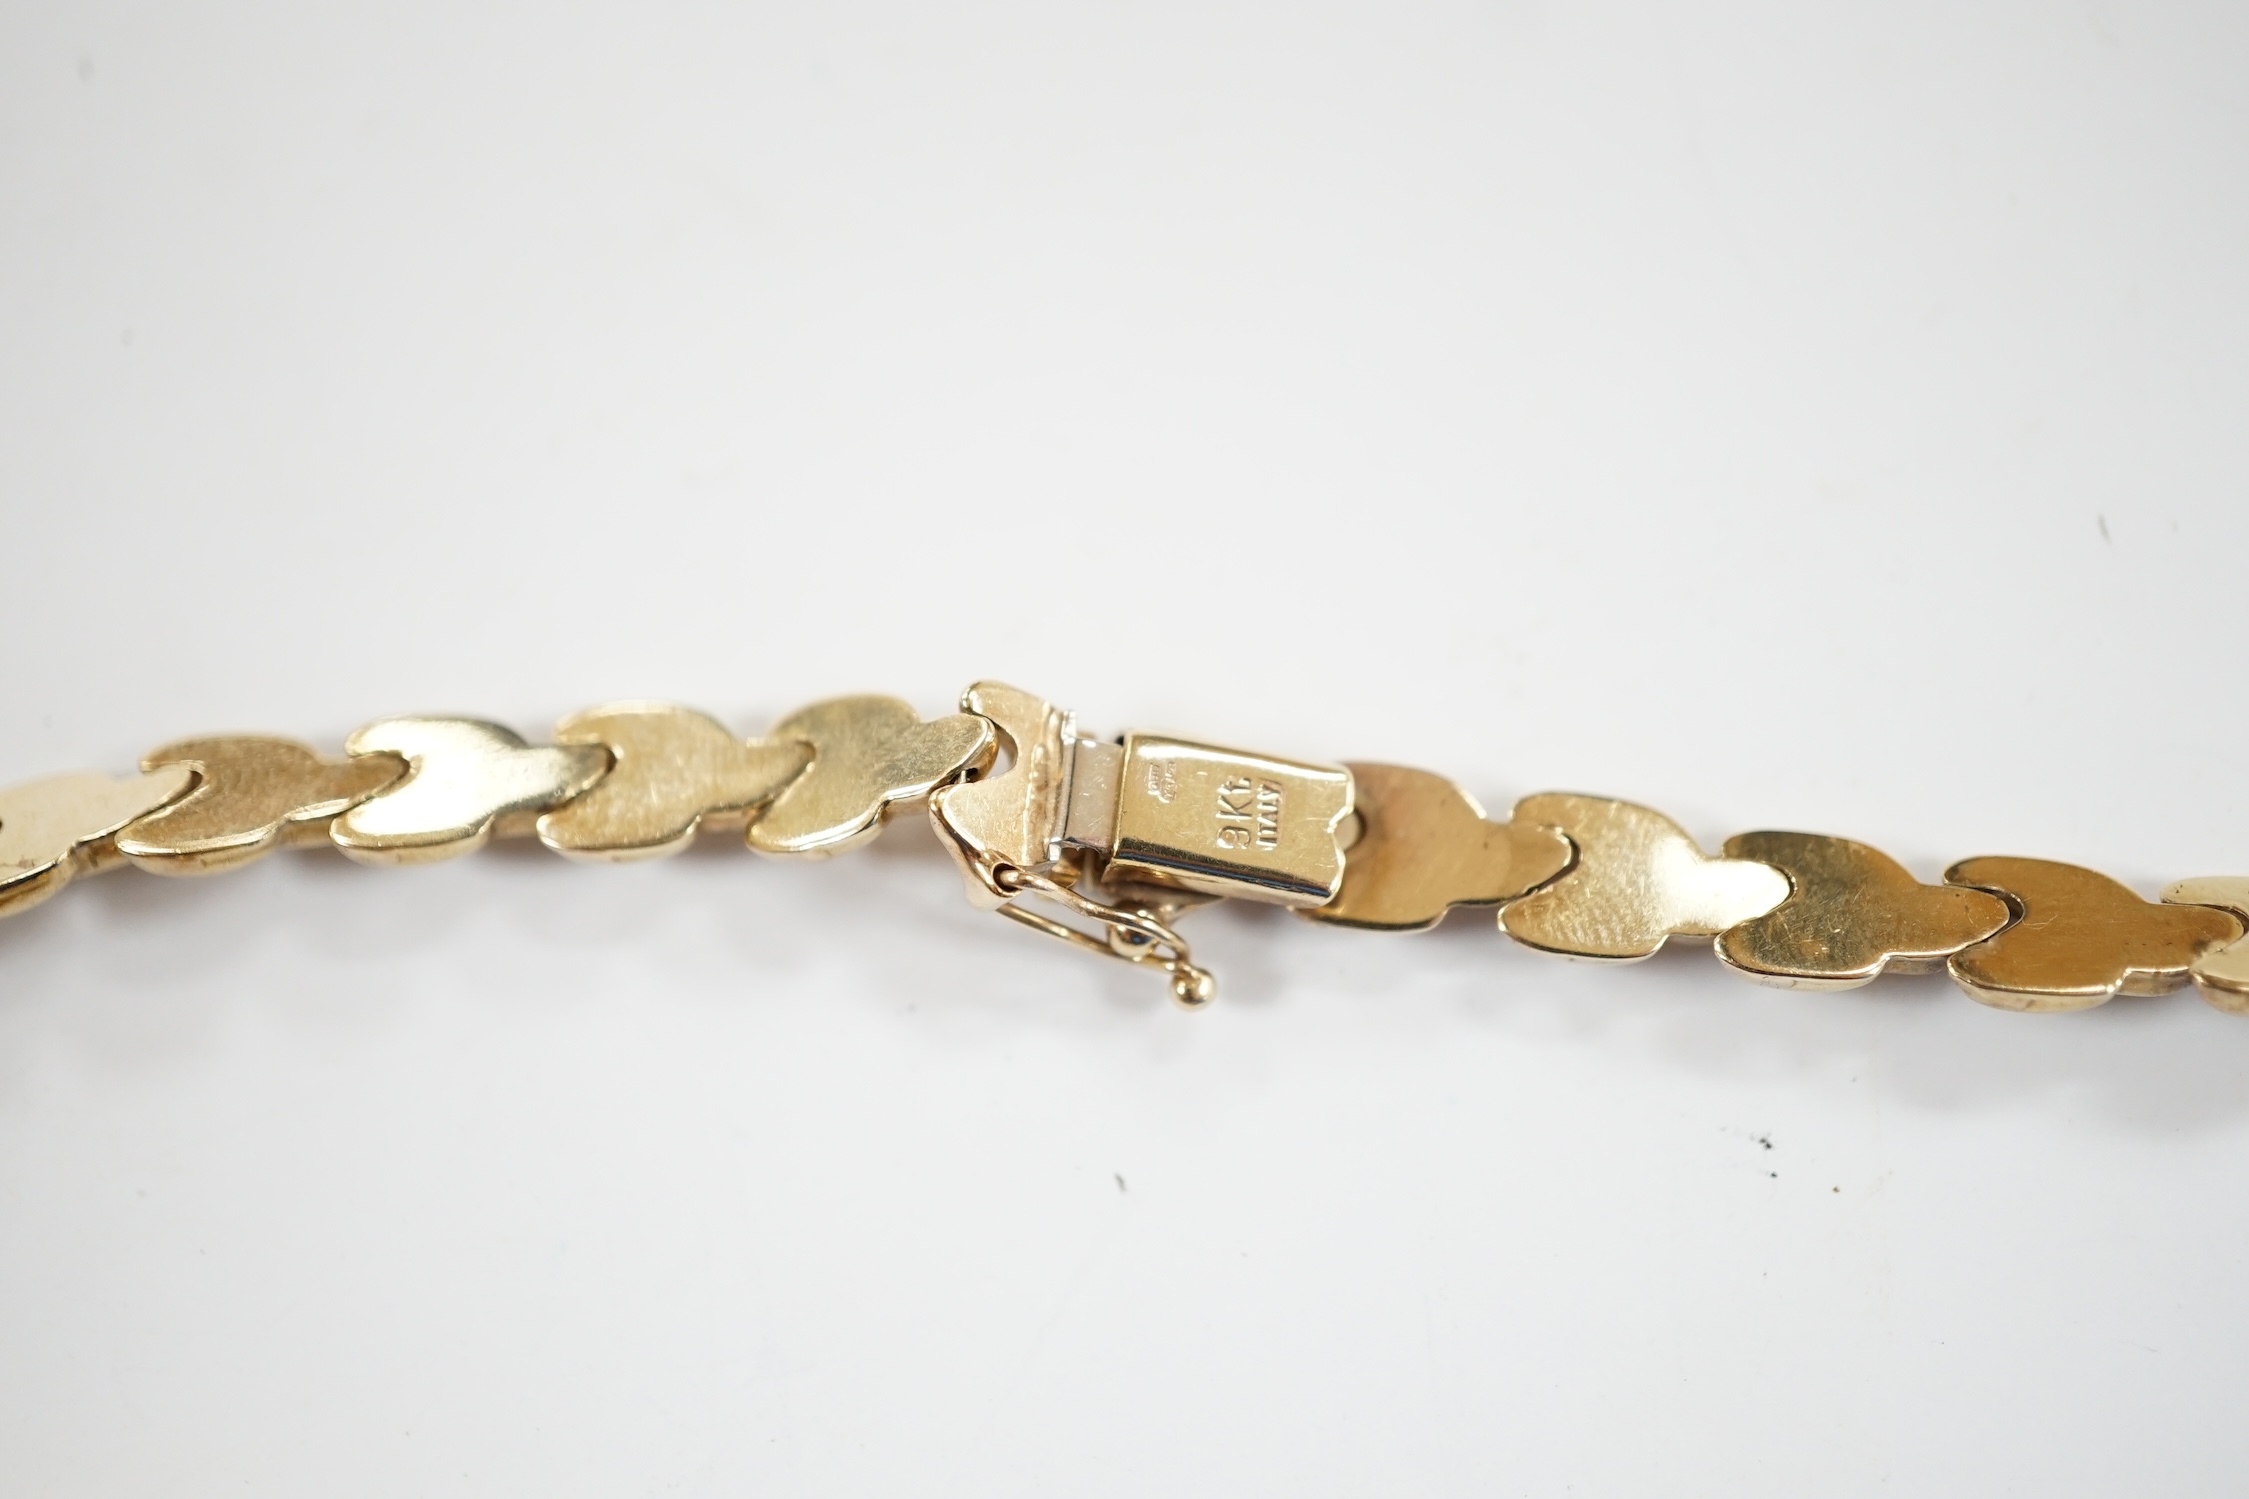 A modern 9ct gold flat link necklace, 34cm, 11.5 grams.